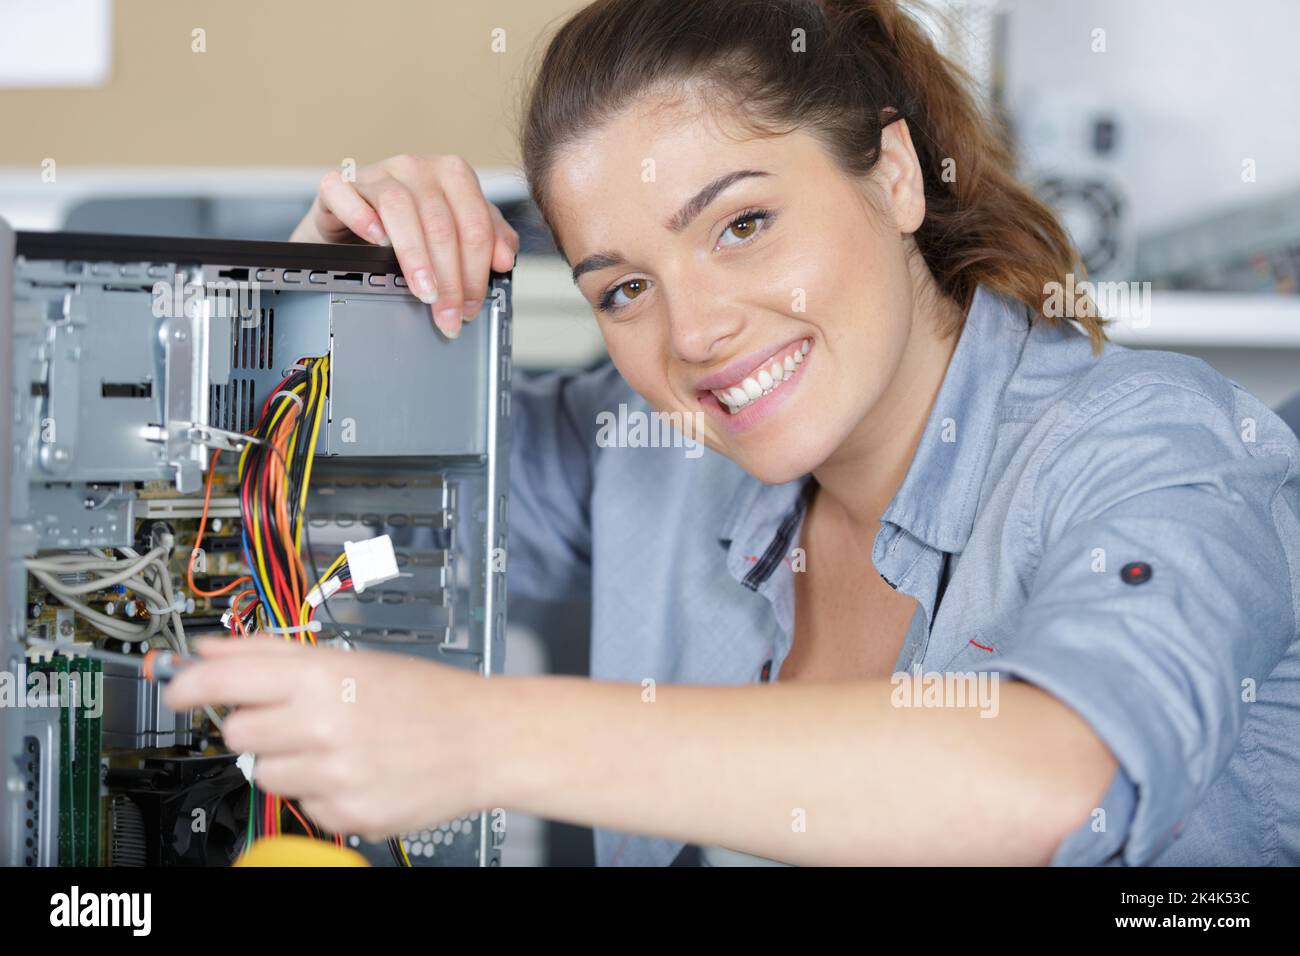 woman working in a pc store Stock Photo